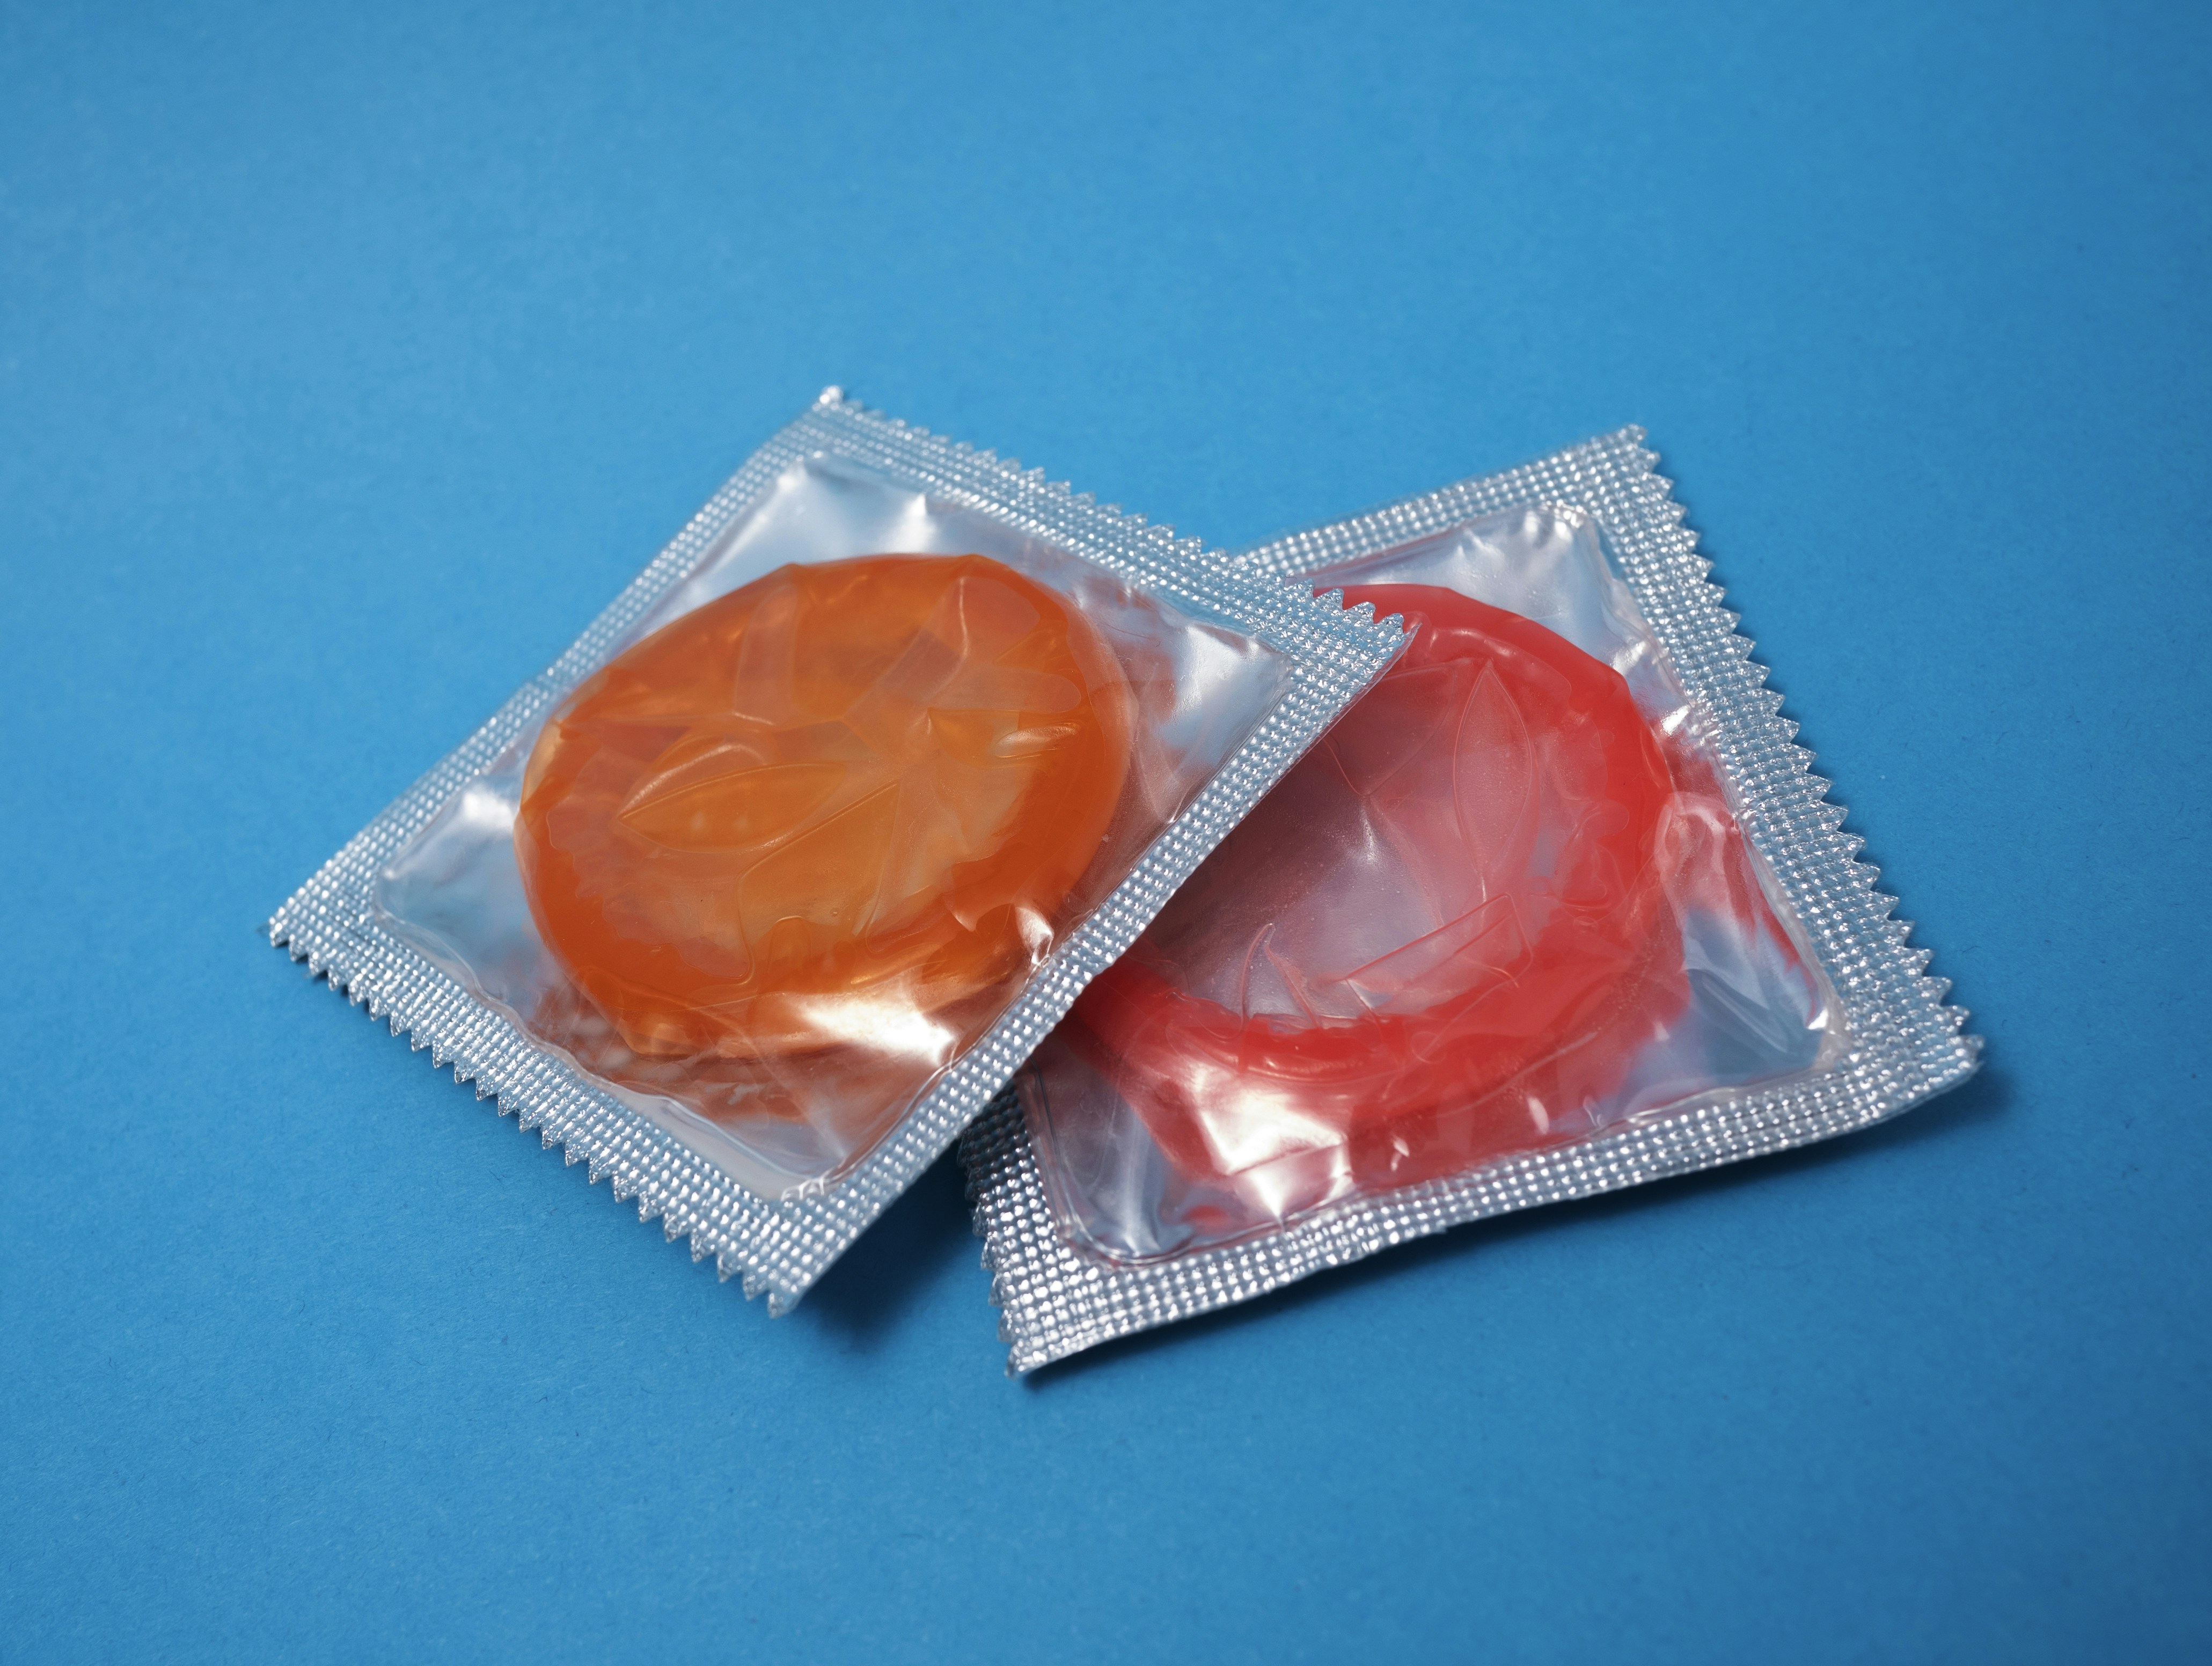 Two condoms on a blue background